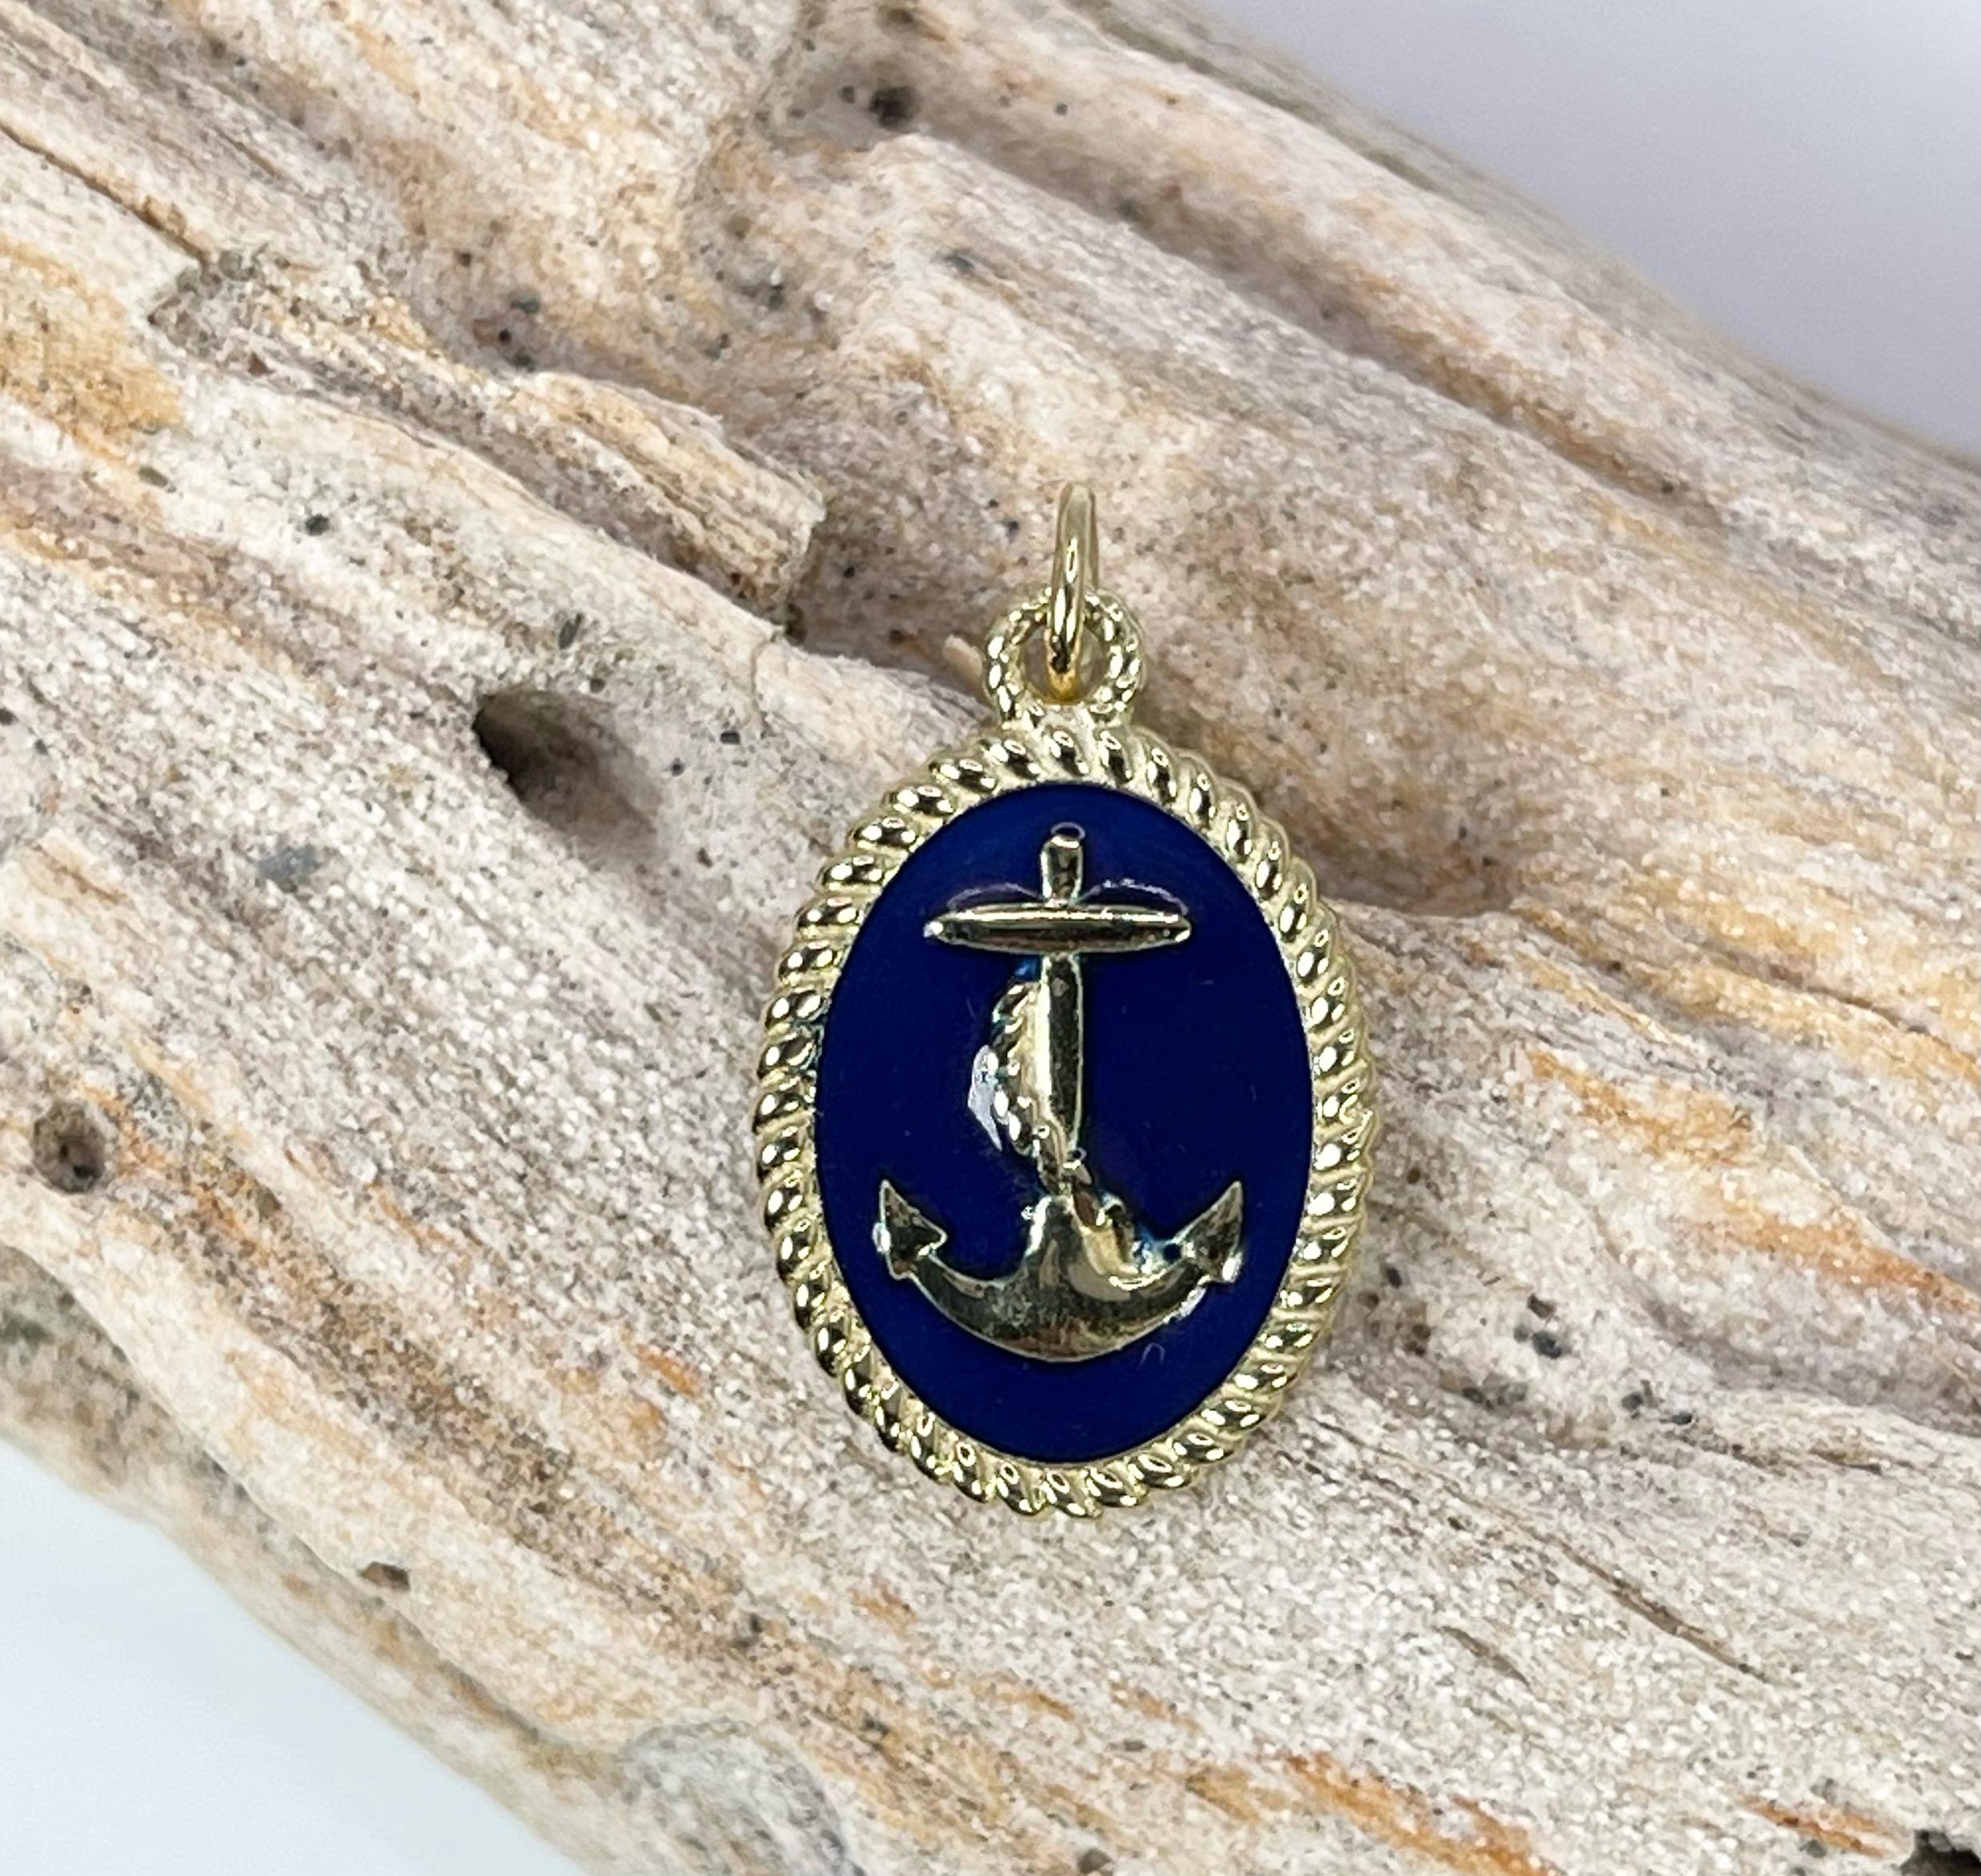 Exquisite and rare vitreous blue enamel pendant in 18KT yellow gold, pendant is double sided.

GRAM WEIGHT: 2.20gr
GOLD: 18KT yellow gold
CHAIN: 18